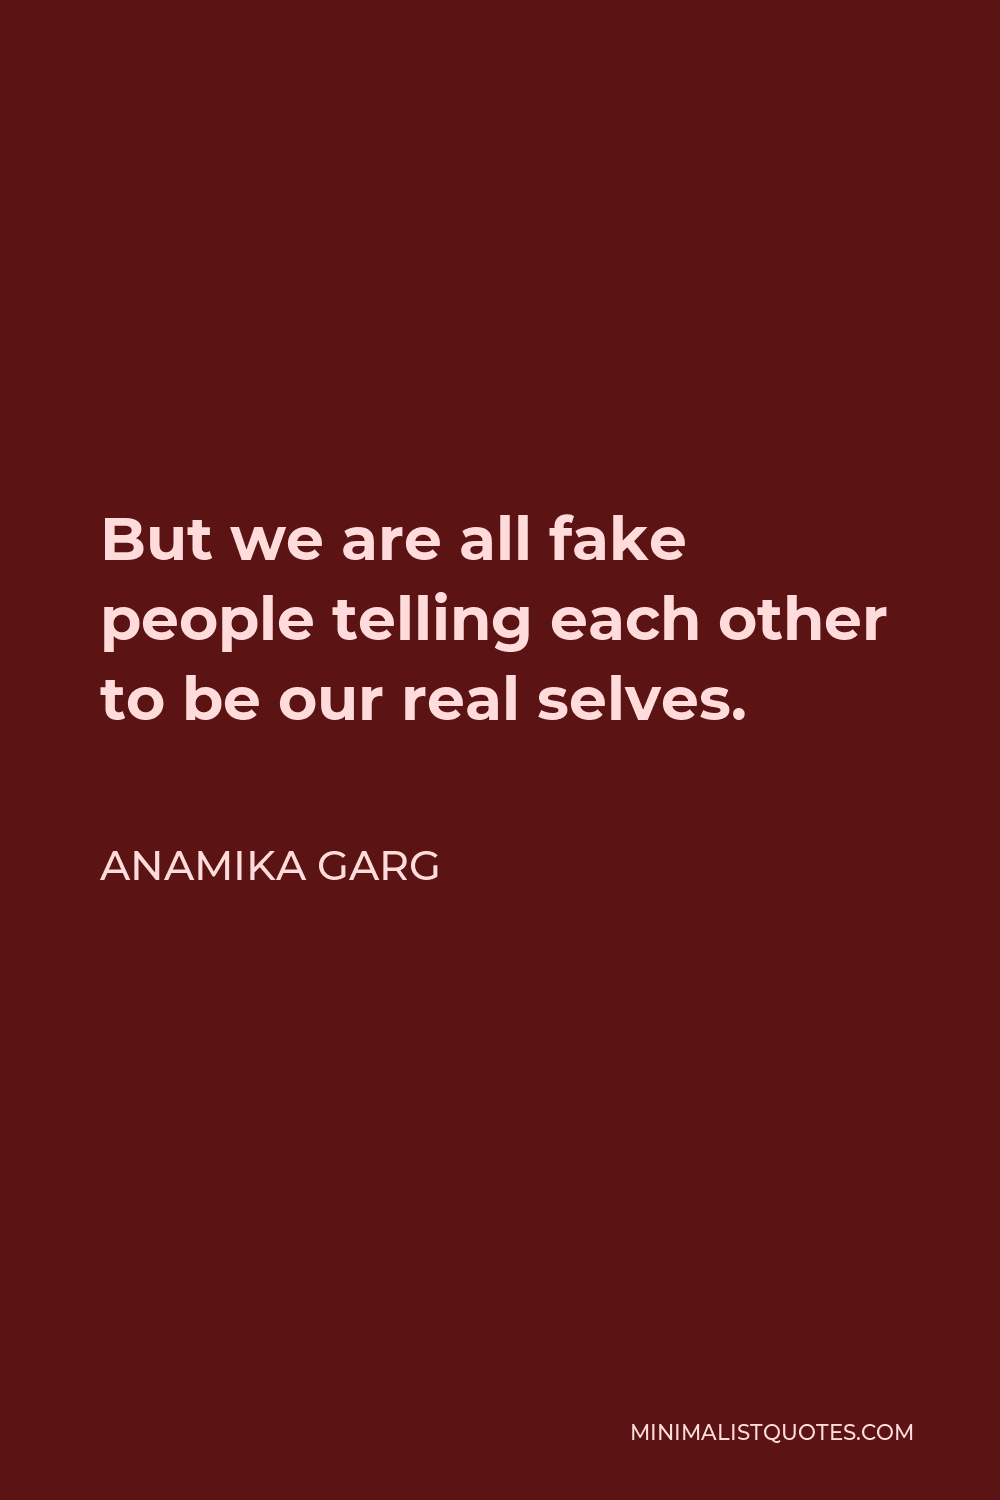 Anamika Garg Quote - But we are all fake people telling each other to be our real selves.